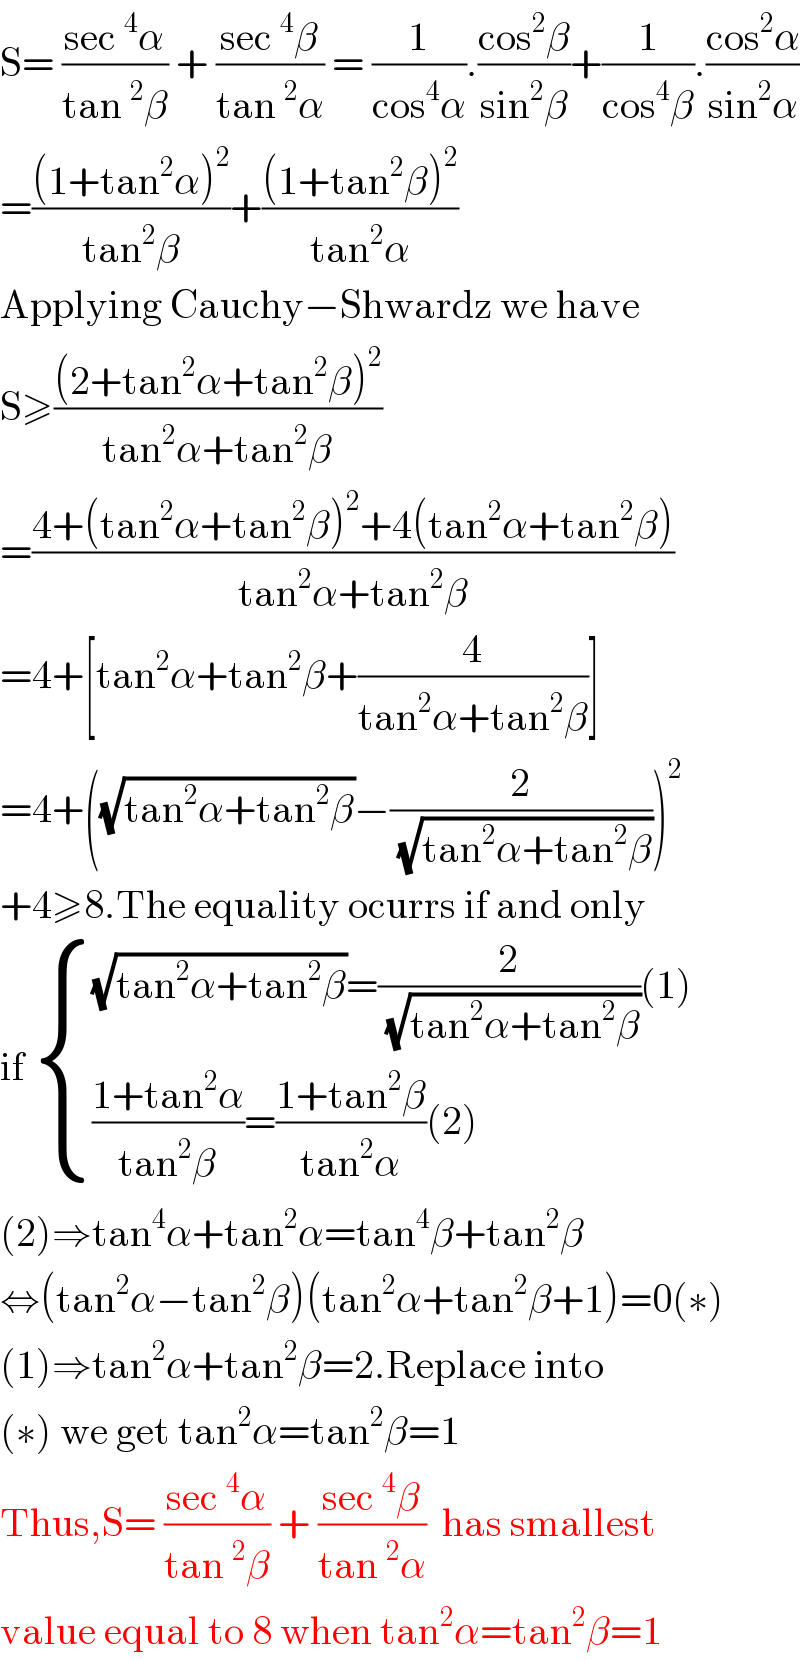 S= ((sec^4 α)/(tan^2 β)) + ((sec^4 β)/(tan^2 α)) = (1/(cos^4 α)).((cos^2 β)/(sin^2 β))+(1/(cos^4 β)).((cos^2 α)/(sin^2 α))  =(((1+tan^2 α)^2 )/(tan^2 β))+(((1+tan^2 β)^2 )/(tan^2 α))  Applying Cauchy−Shwardz we have  S≥(((2+tan^2 α+tan^2 β)^2 )/(tan^2 α+tan^2 β))  =((4+(tan^2 α+tan^2 β)^2 +4(tan^2 α+tan^2 β))/(tan^2 α+tan^2 β))  =4+[tan^2 α+tan^2 β+(4/(tan^2 α+tan^2 β))]  =4+((√(tan^2 α+tan^2 β))−(2/( (√(tan^2 α+tan^2 β)))))^2   +4≥8.The equality ocurrs if and only  if  { (((√(tan^2 α+tan^2 β))=(2/( (√(tan^2 α+tan^2 β))))(1))),((((1+tan^2 α)/(tan^2 β))=((1+tan^2 β)/(tan^2 α))(2))) :}  (2)⇒tan^4 α+tan^2 α=tan^4 β+tan^2 β  ⇔(tan^2 α−tan^2 β)(tan^2 α+tan^2 β+1)=0(∗)  (1)⇒tan^2 α+tan^2 β=2.Replace into  (∗) we get tan^2 α=tan^2 β=1  Thus,S= ((sec^4 α)/(tan^2 β)) + ((sec^4 β)/(tan^2 α))  has smallest  value equal to 8 when tan^2 α=tan^2 β=1  